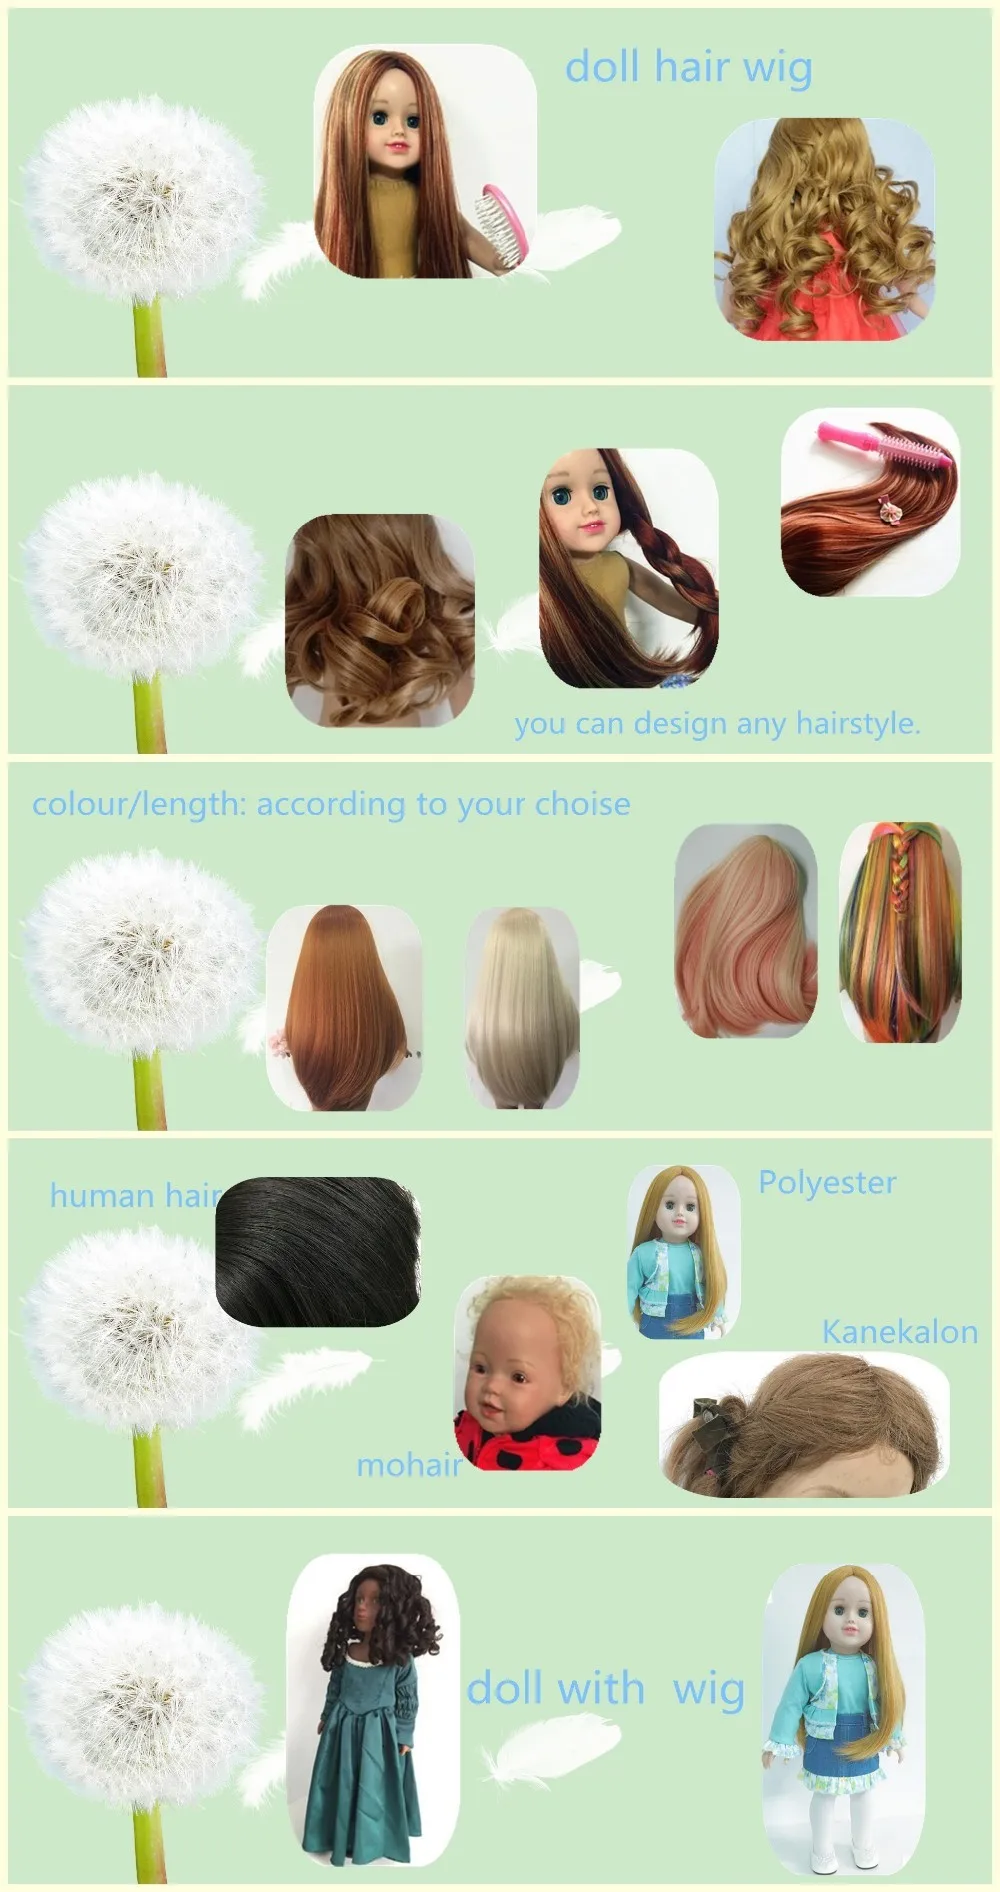 High Quality Real Doll Hair Wigs Afro Wholesale Buy Doll Hair Wigs Afro Real Doll Wig High Quality Real Doll Wig Product On Alibaba Com